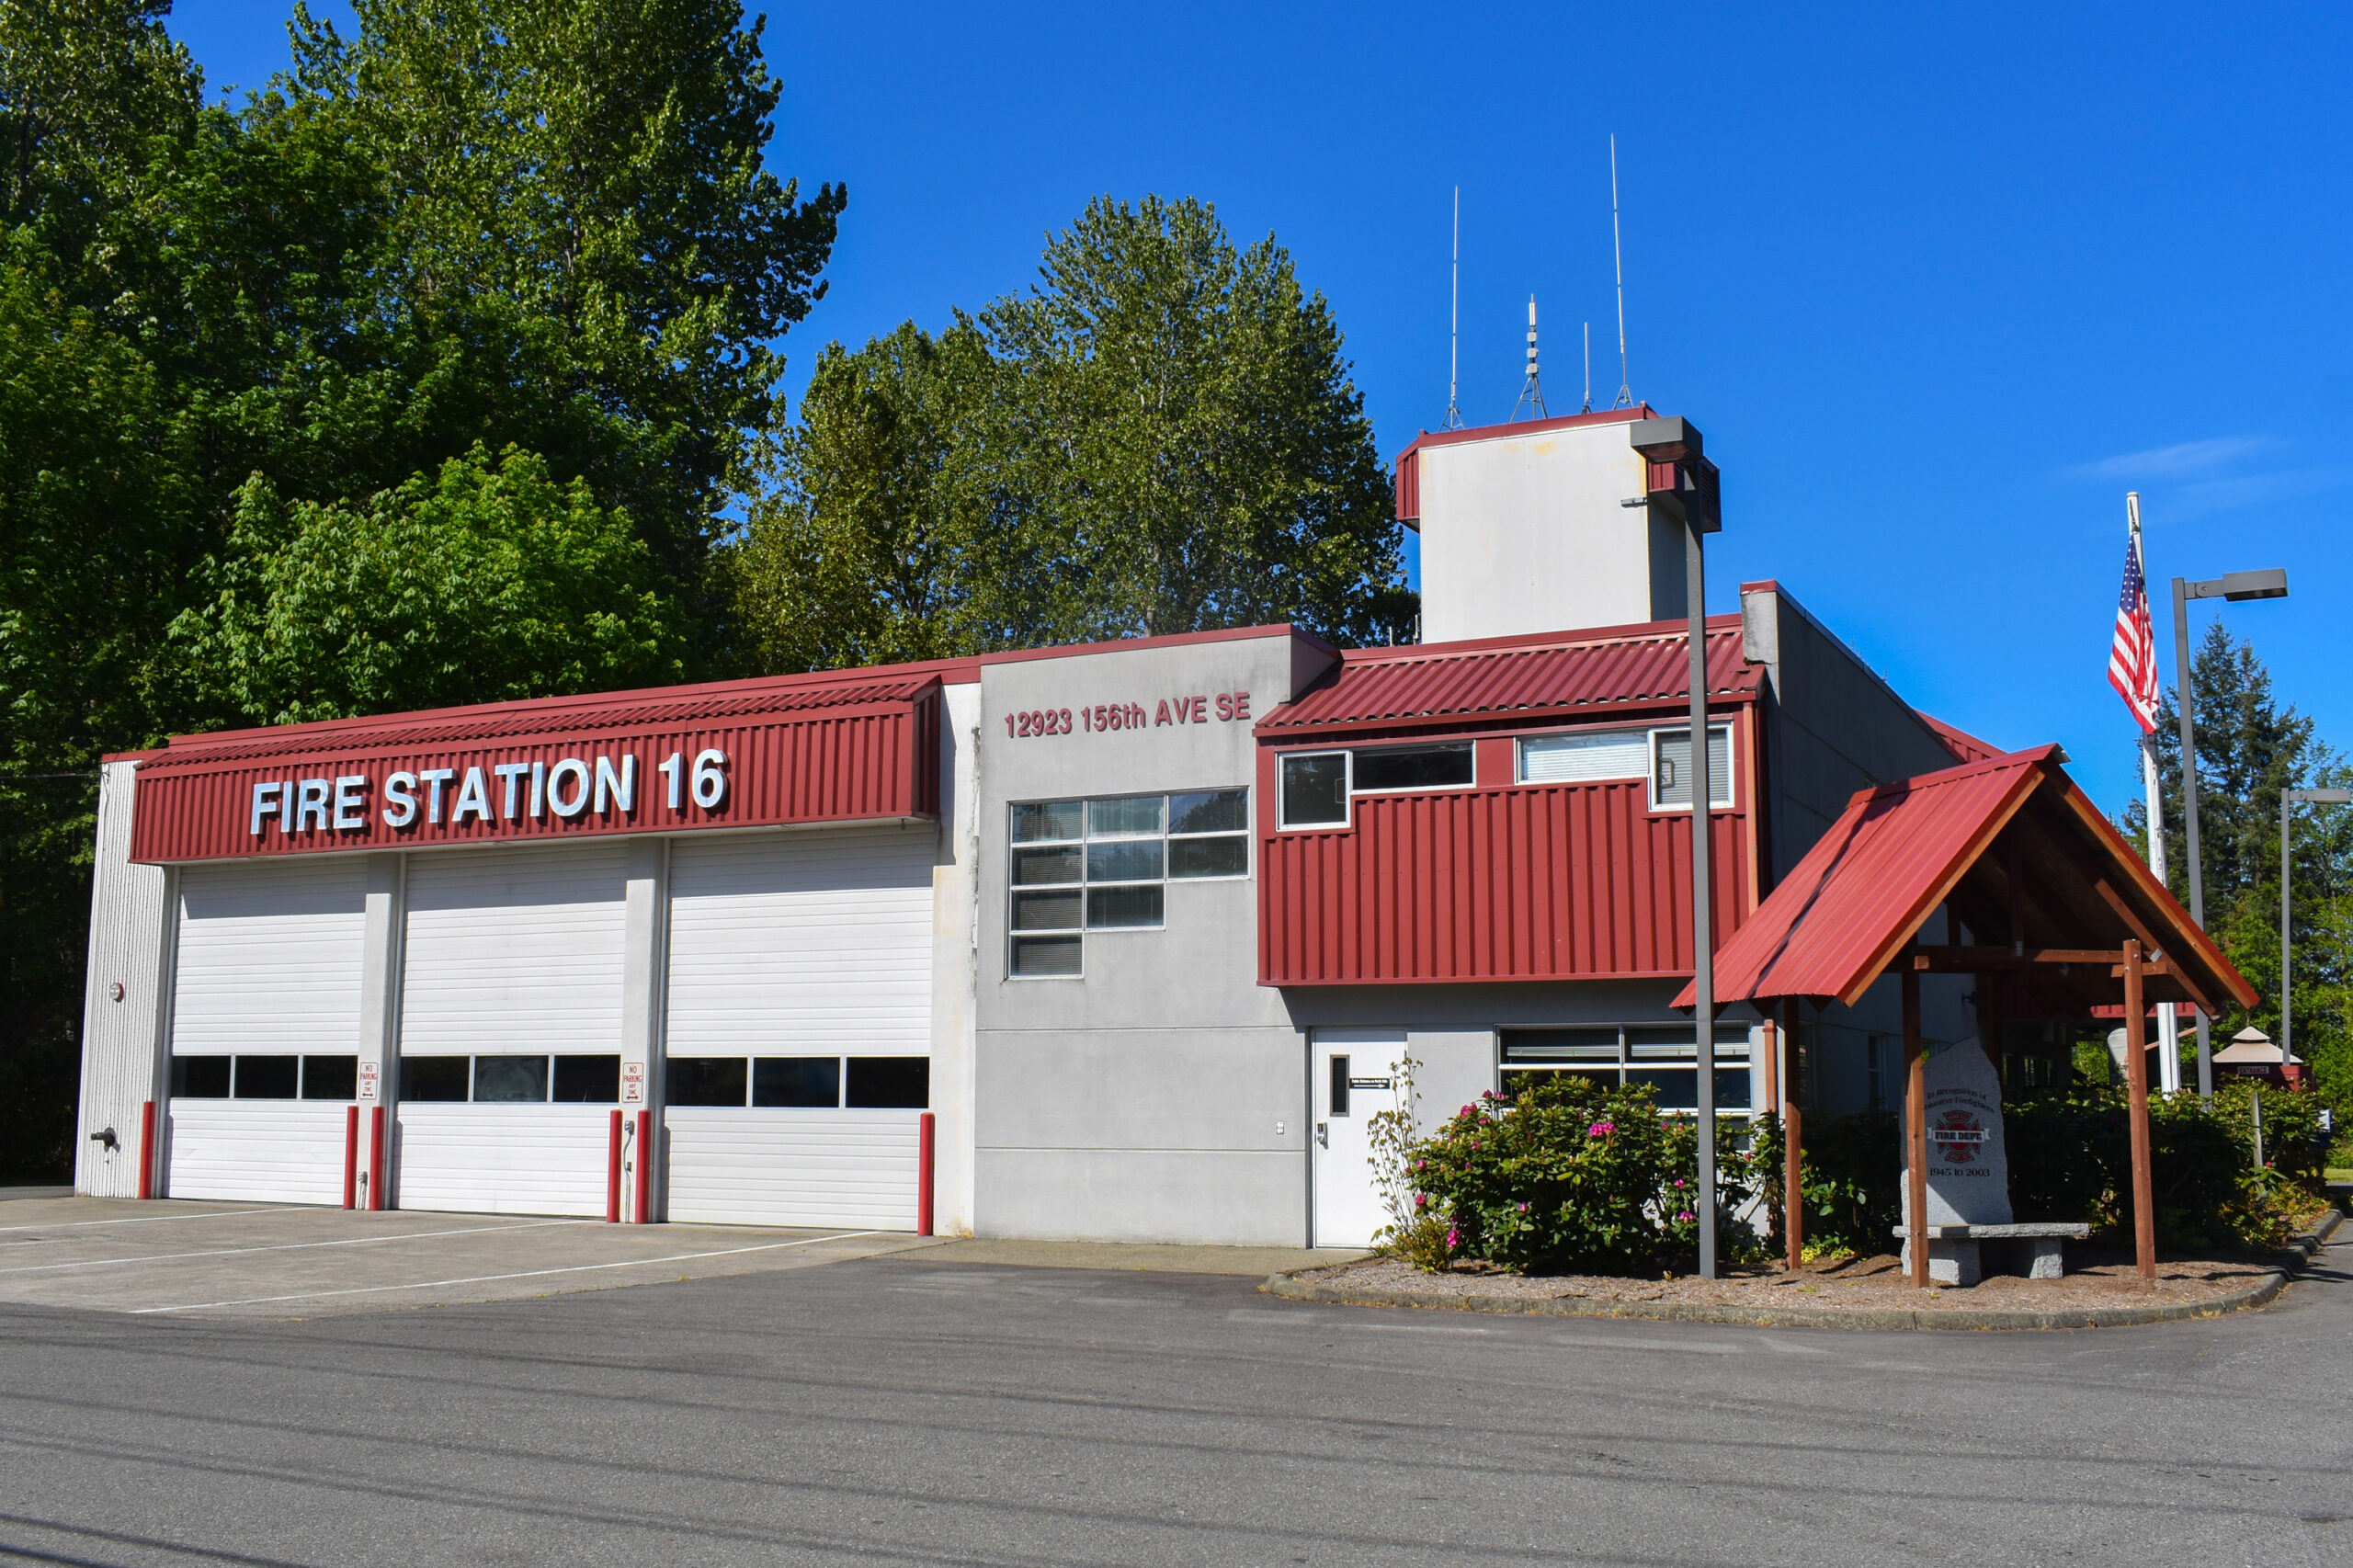 Fire Station 16